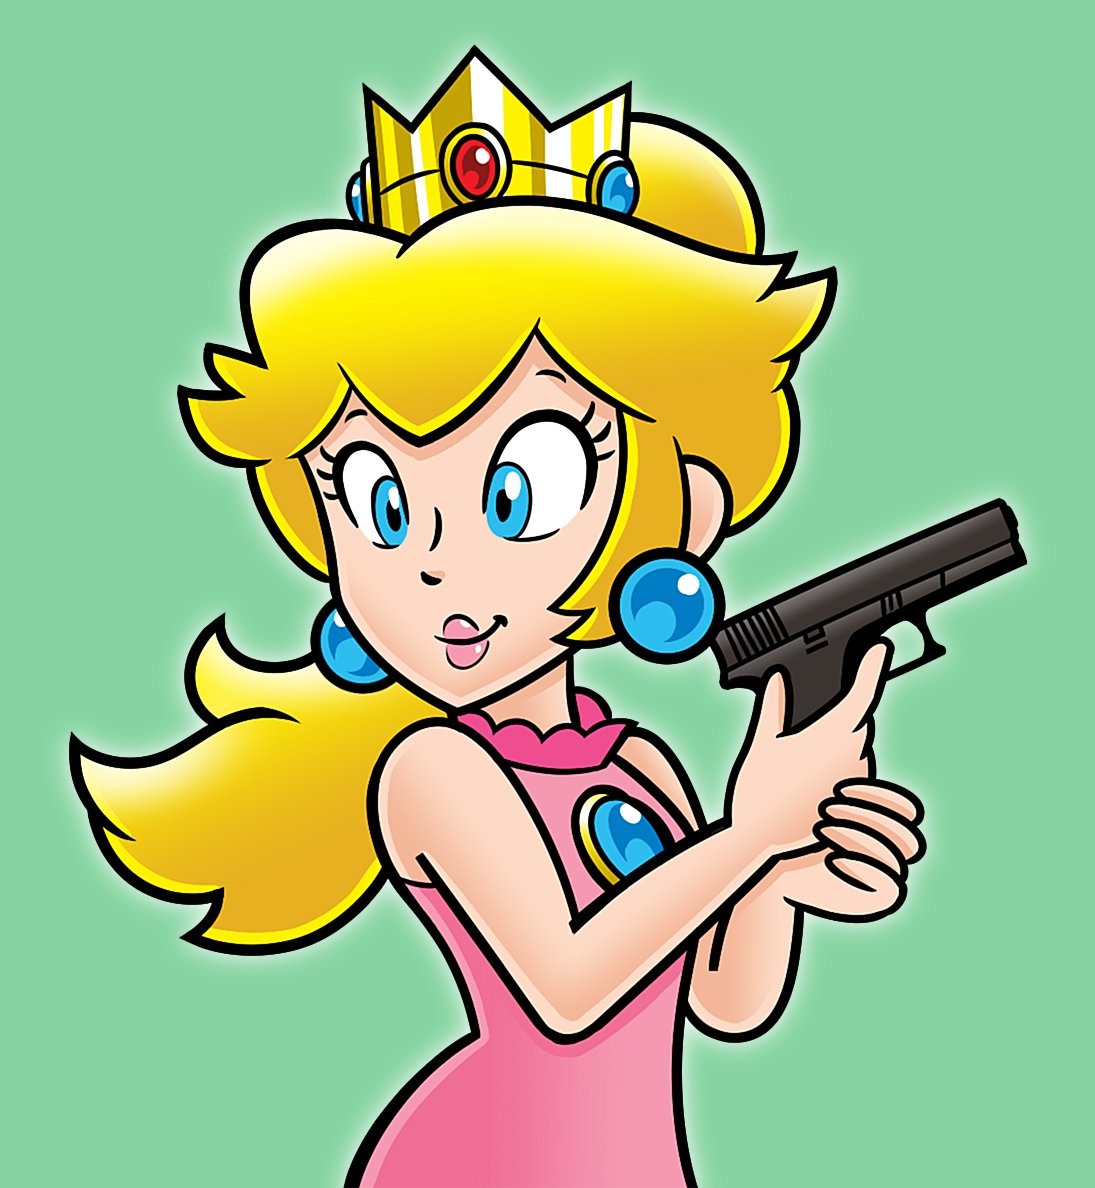 1girl blonde_hair blue_eyes brooch crown doc_shoddy dress earrings green_background gun holding holding_gun holding_weapon jewelry nakaue_shigehisa_(style) pink_dress ponytail princess_peach simple_background sleeveless solo sphere_earrings super_mario_bros. upper_body weapon weapon_request